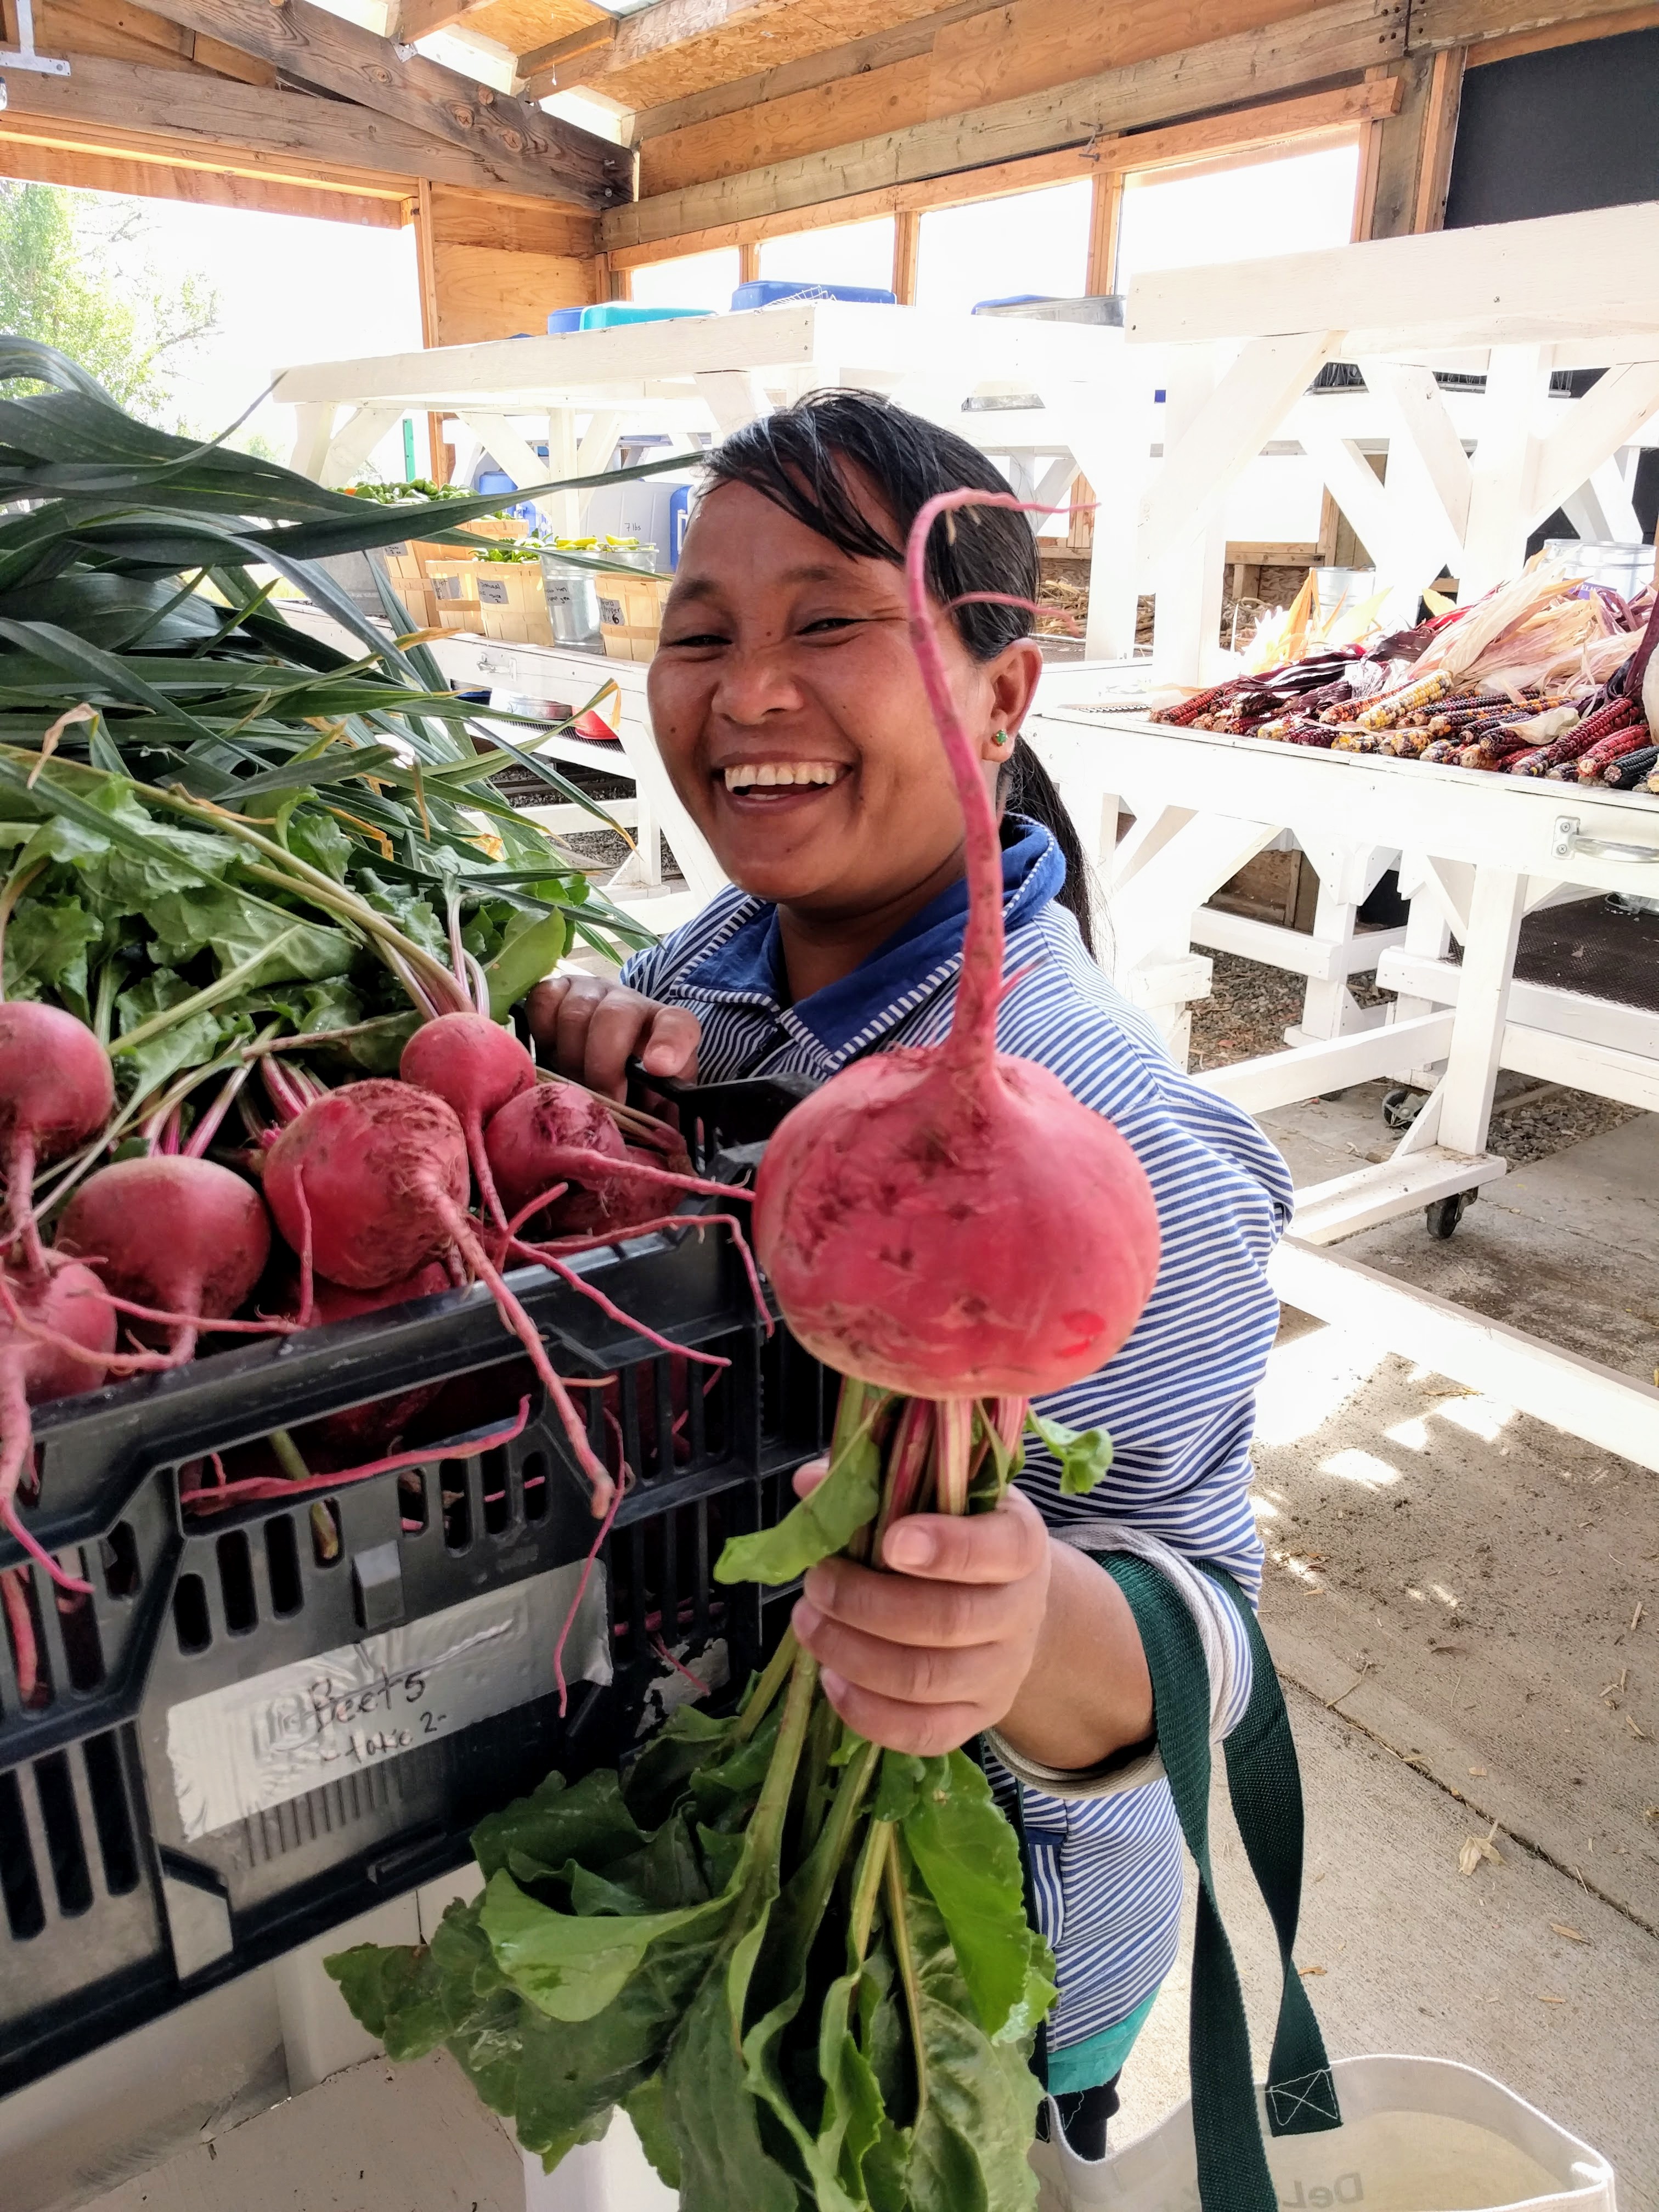 Stanley Marketplace Introduces a Farmers Market with 40+ Colorado Vendors - 303 Magazine